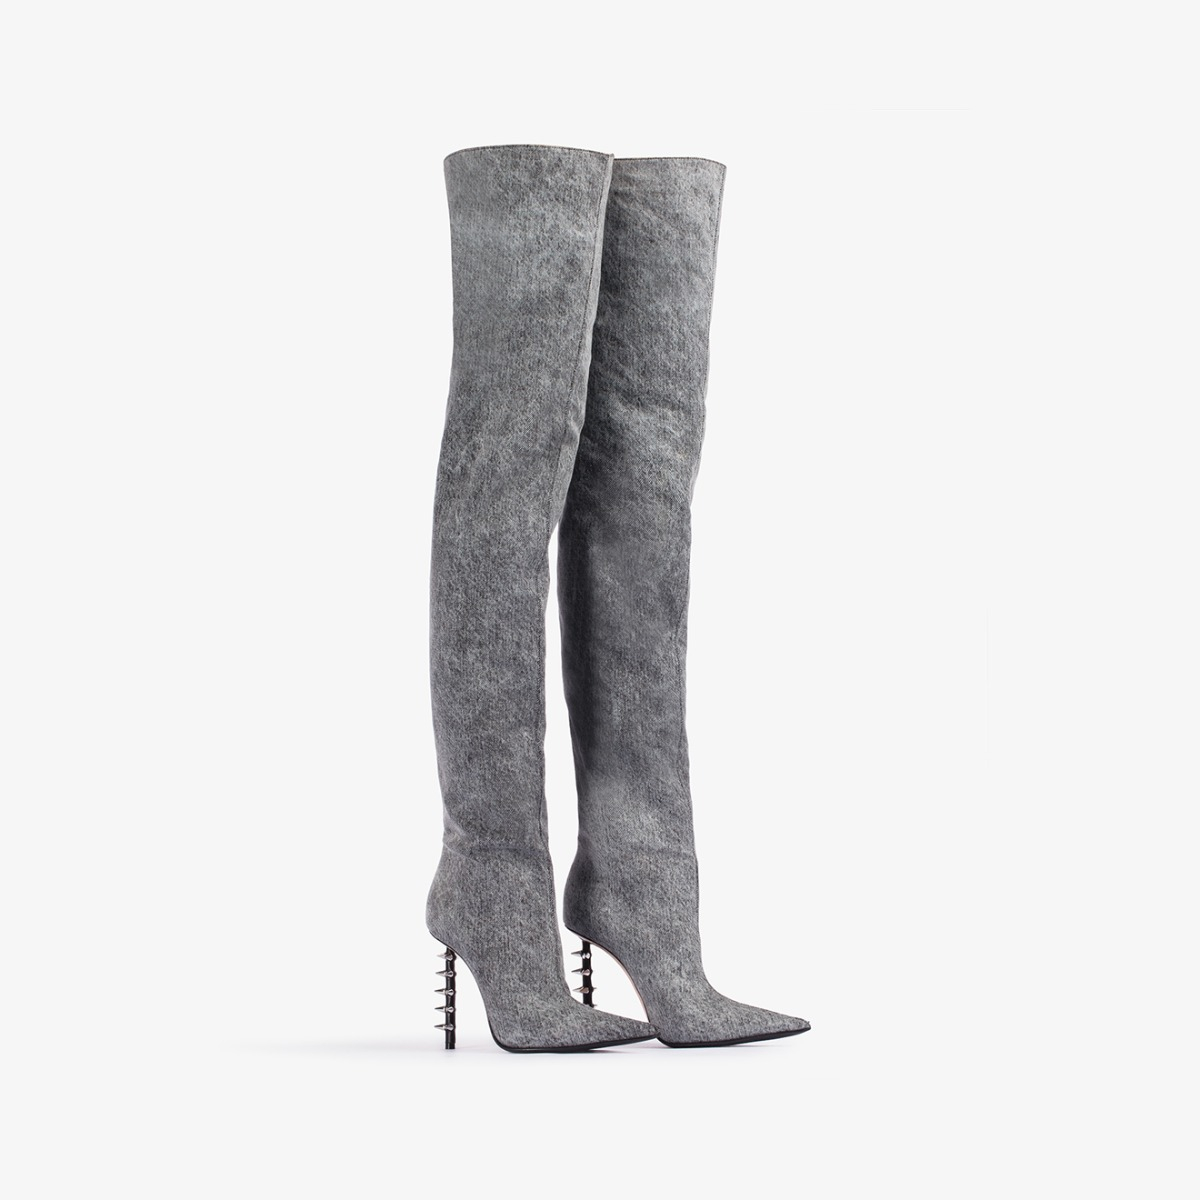 JAGGER THIGH-HIGH BOOT 120 mm - Le Silla | Official Online Store